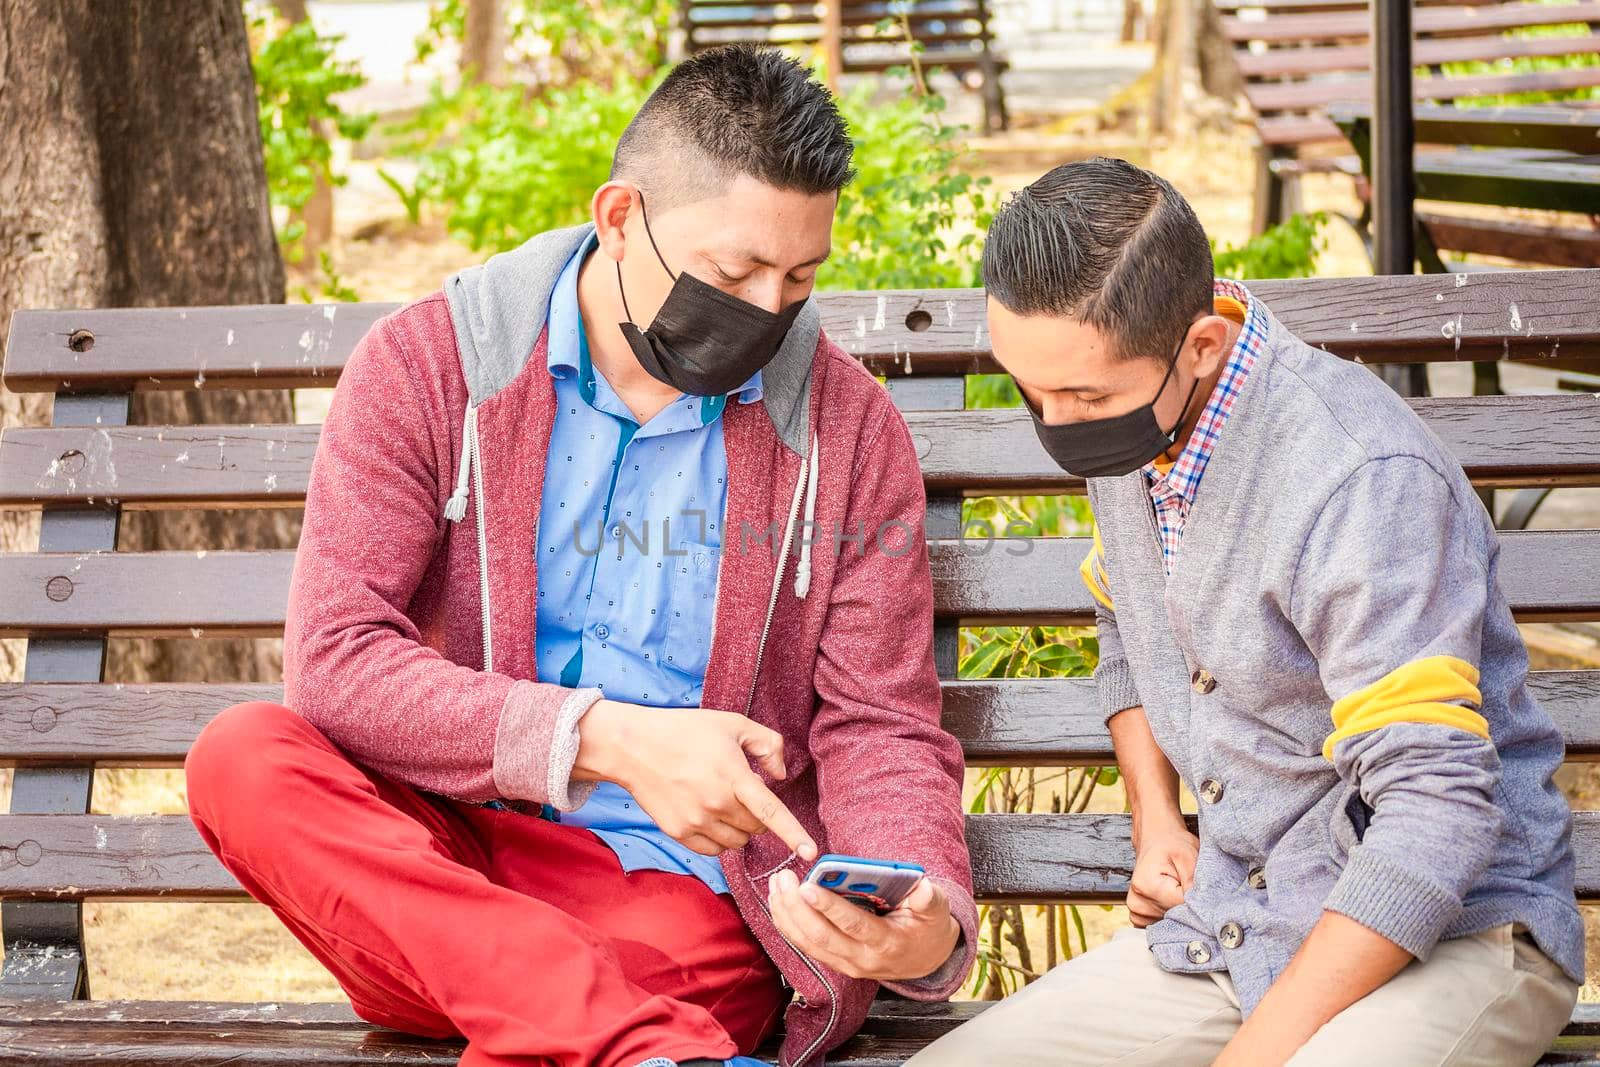 Two men wearing masks checking their cell phones on a bench, a man showing his cell phone to another man